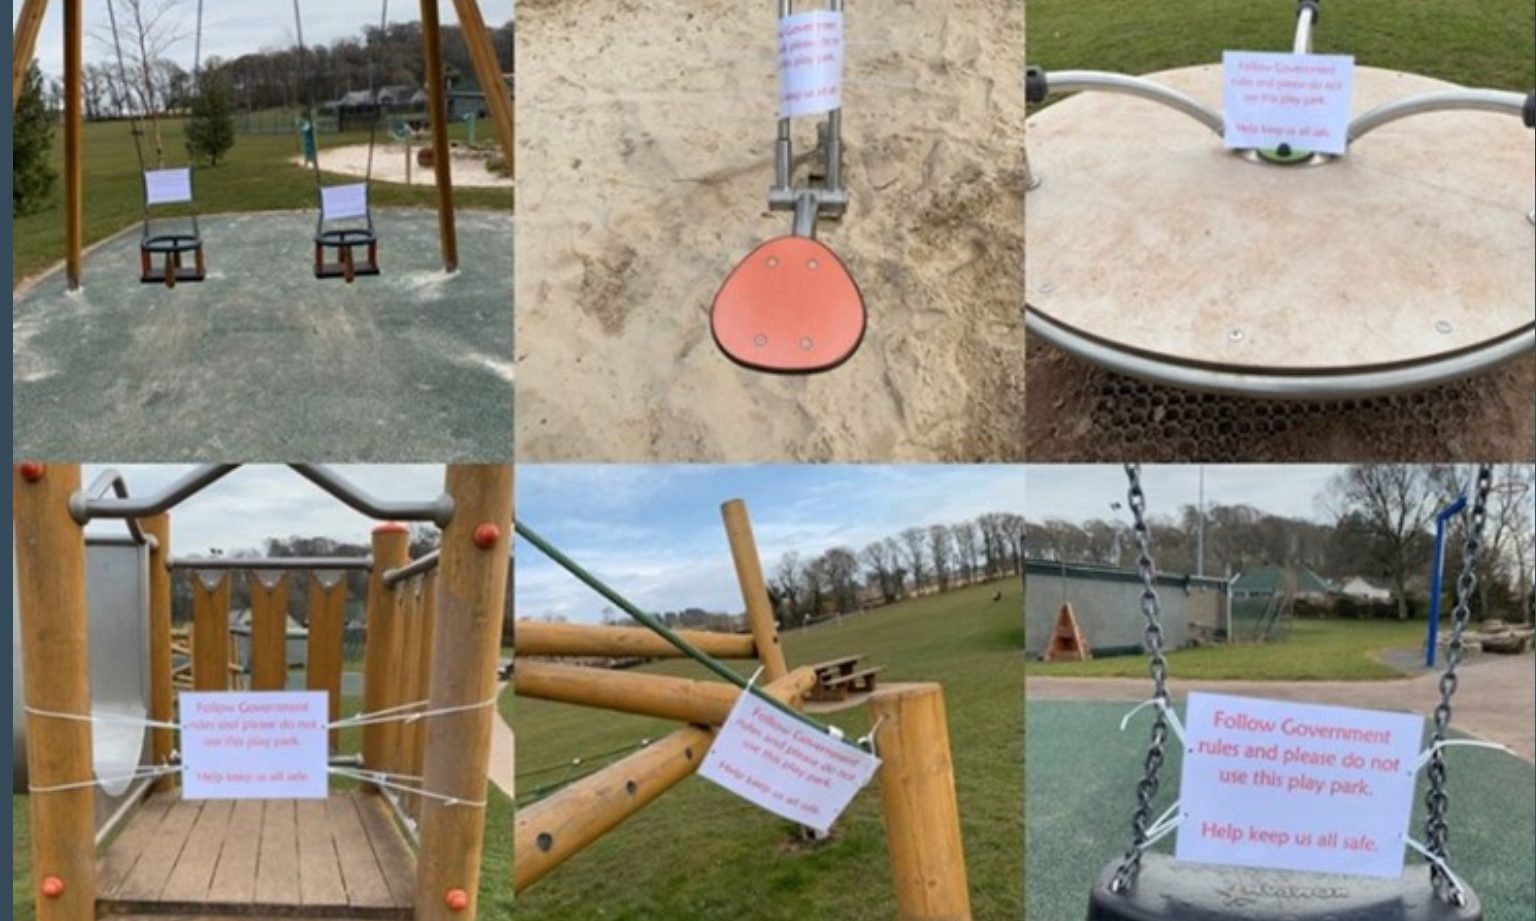 Signage on play parks